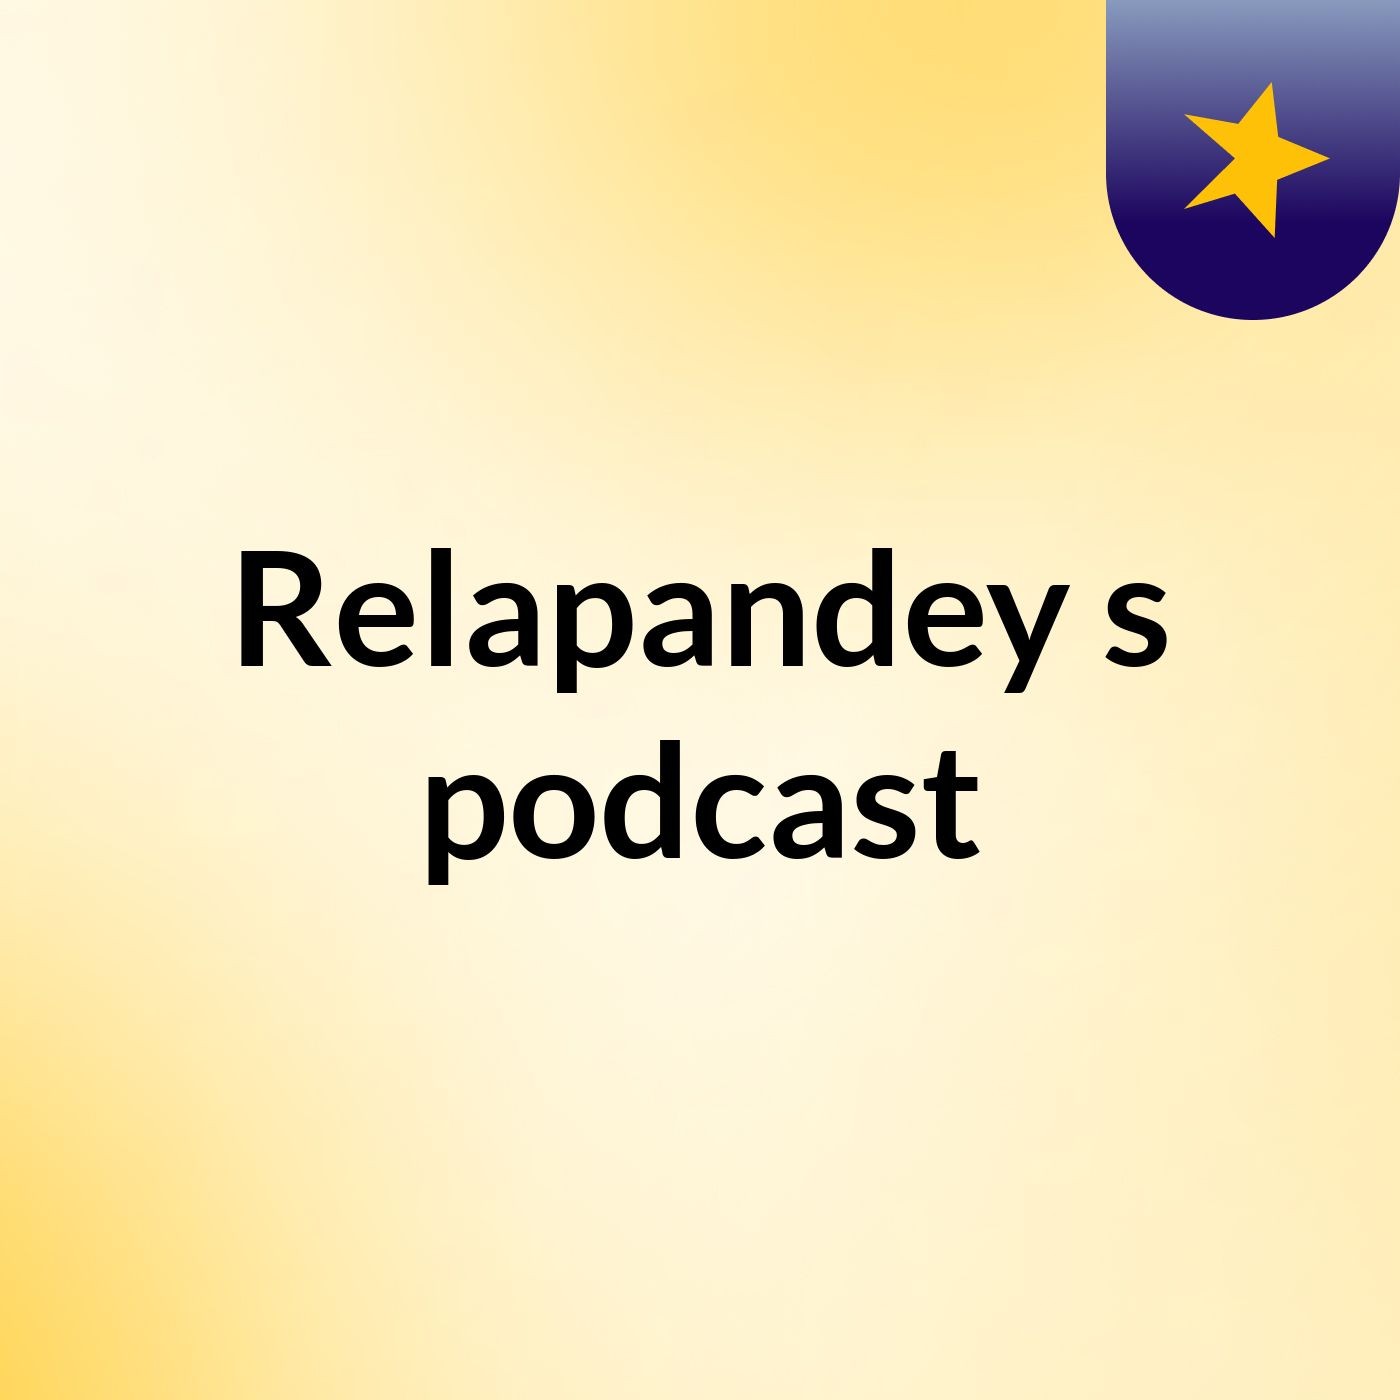 Episode 2 - Relapandey's podcast